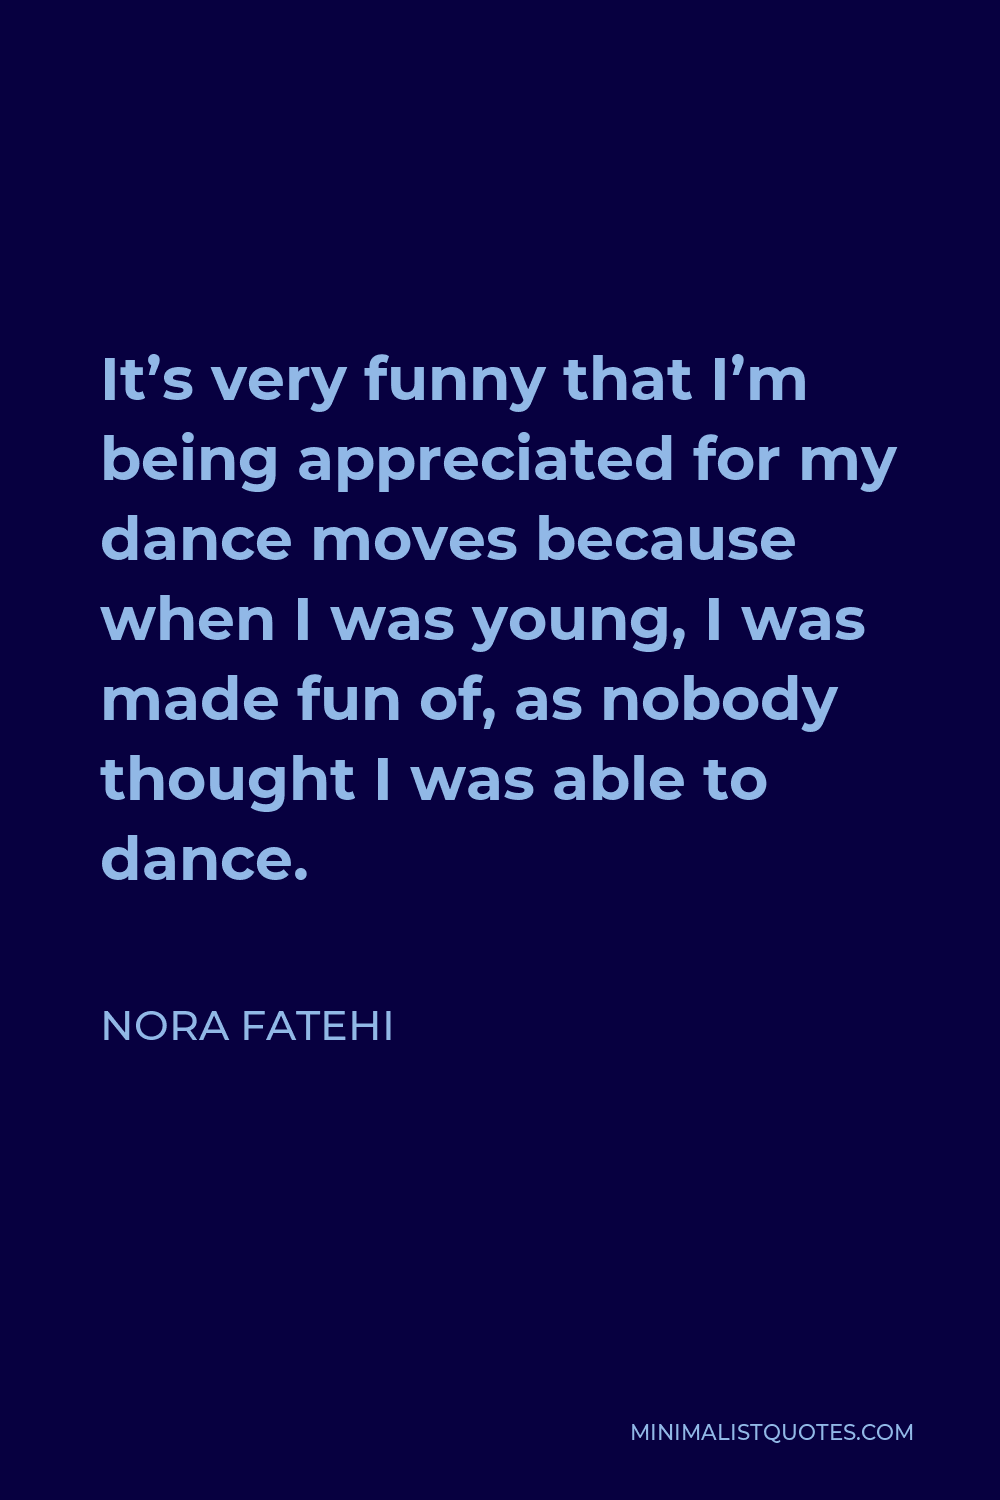 Nora Fatehi Quote: It's very funny that I'm being appreciated for my dance  moves because when I was young, I was made fun of, as nobody thought I was  able to dance.